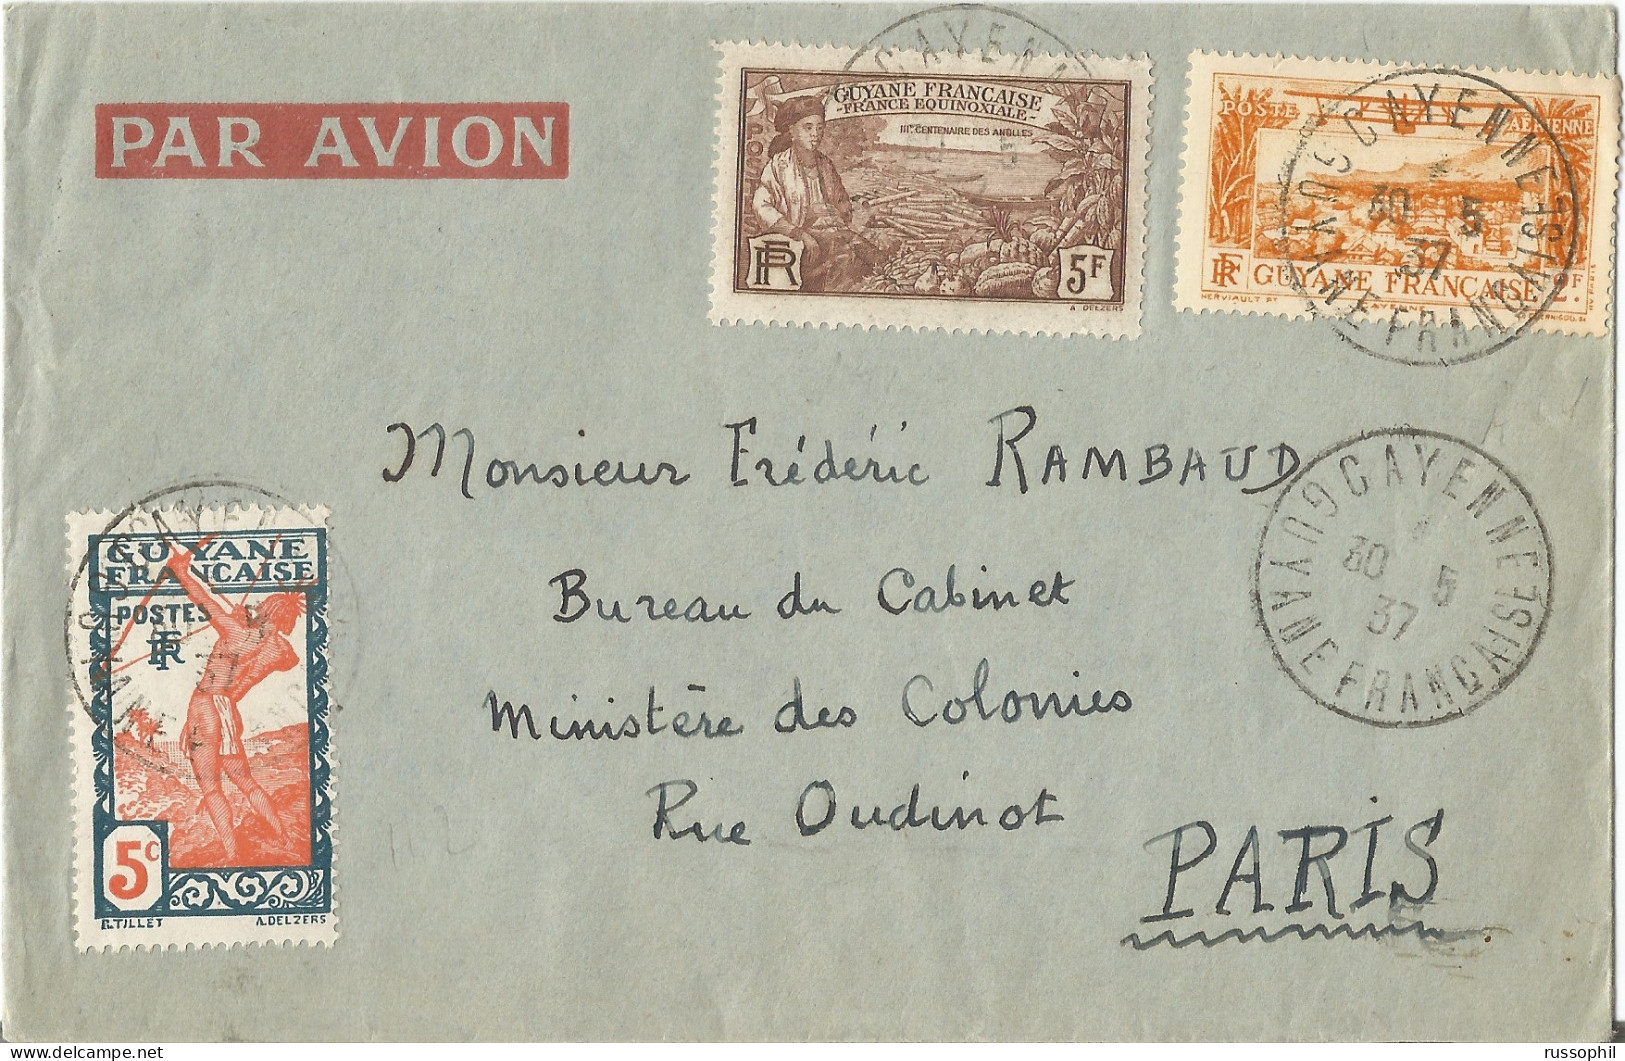 GUYANE - 7 FR.  5 CENT. FRANKING ON AIR MAILED COVER FROM CAYENNE TO FRANCE - 1937 - Briefe U. Dokumente